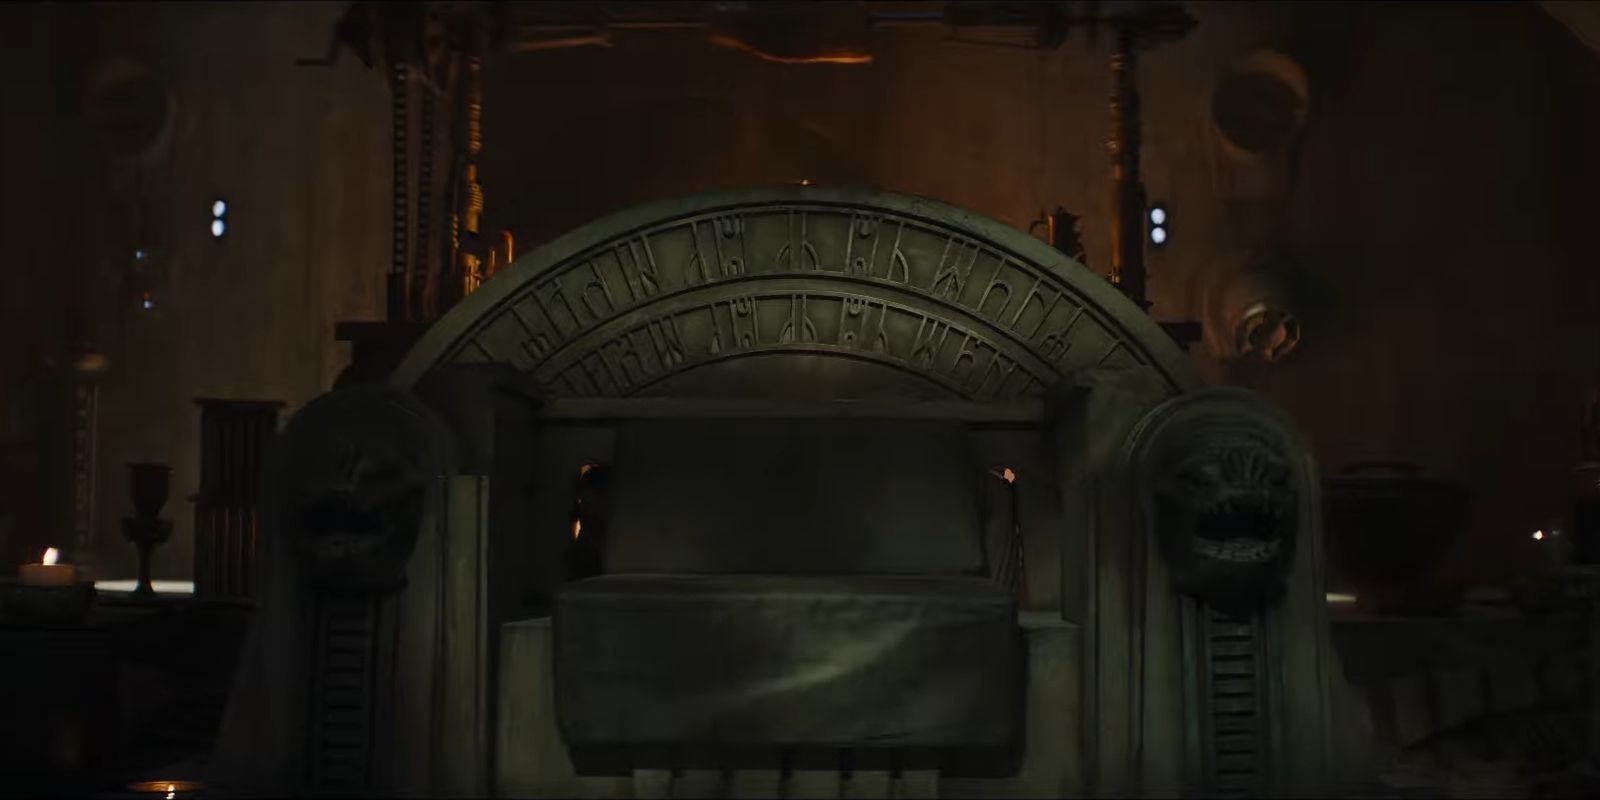 The Throne in Jabba's Palace in Star Wars The Book of Boba Fett. Notably, rancor heads are carved into the armrests.